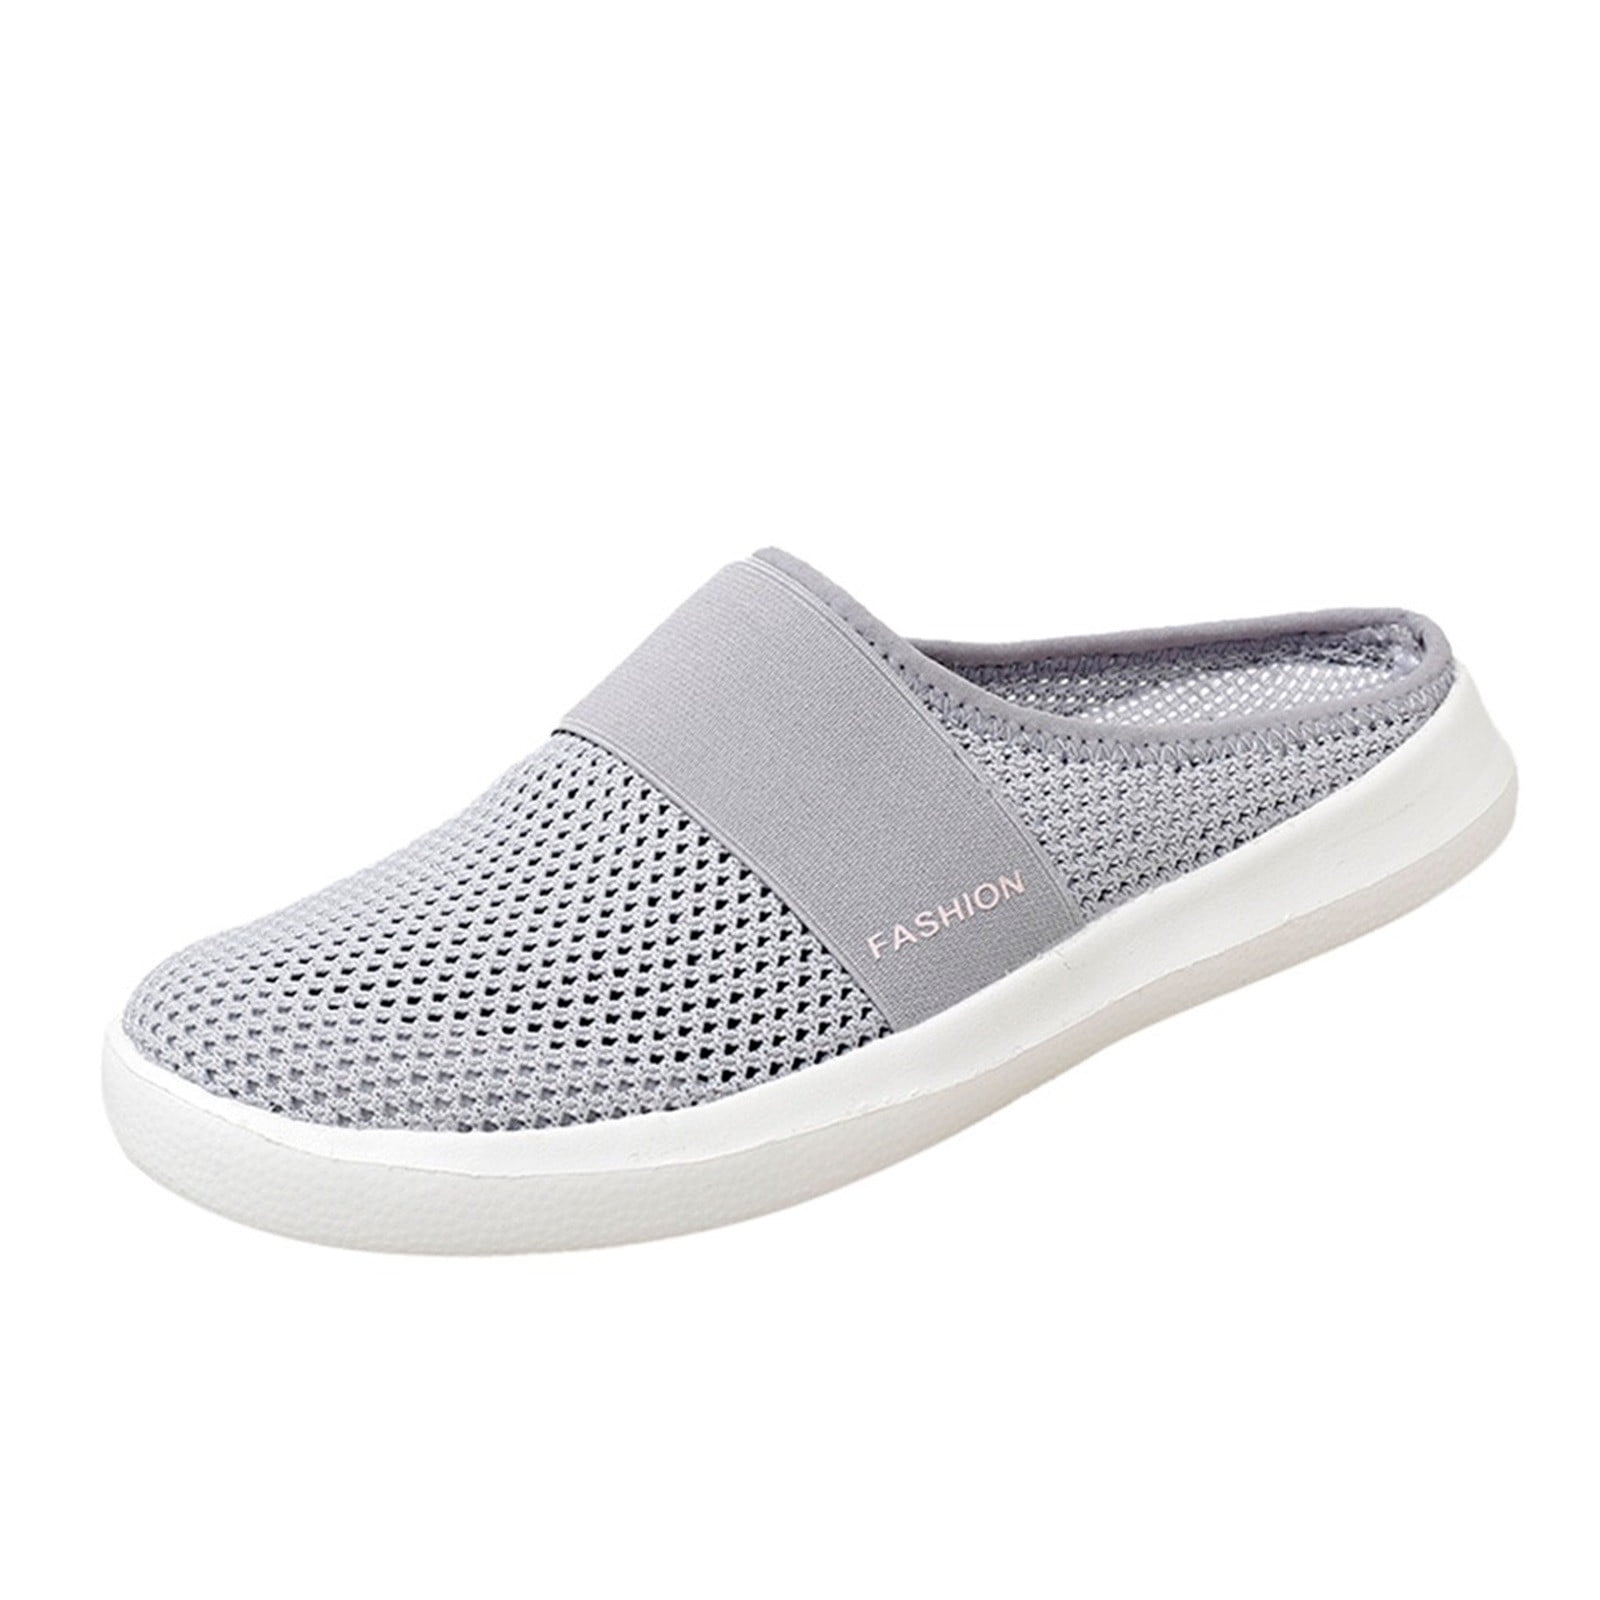 EQWLJWE Casual Shoes For Women Breathable Slip-on Mesh Outdoor Leisure ...